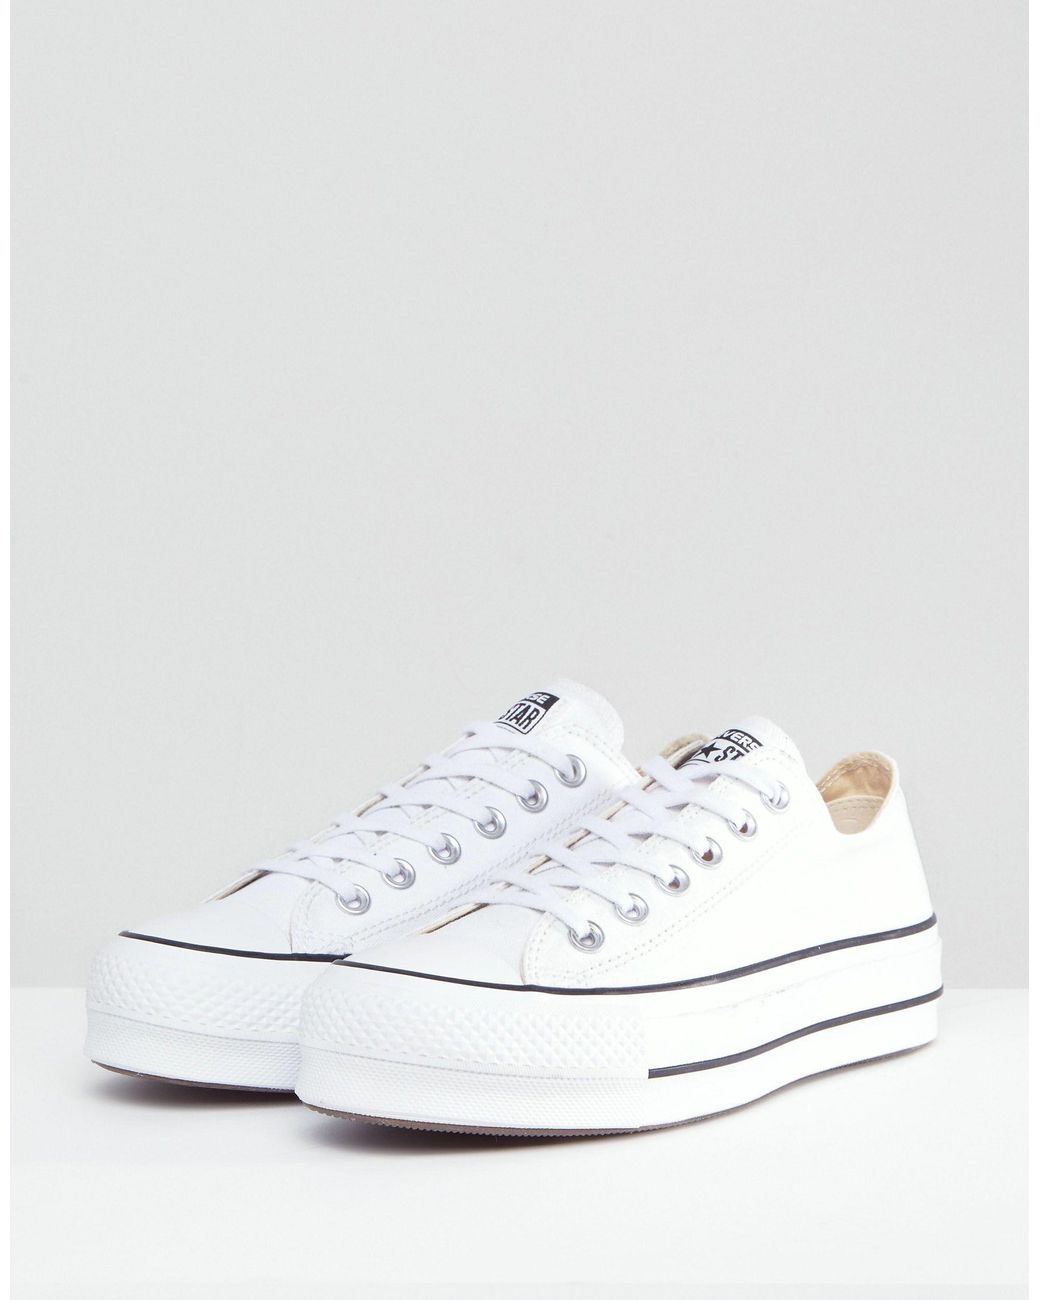 Converse Chuck Taylor All Star Ox Canvas Platform Sneakers in White | Lyst